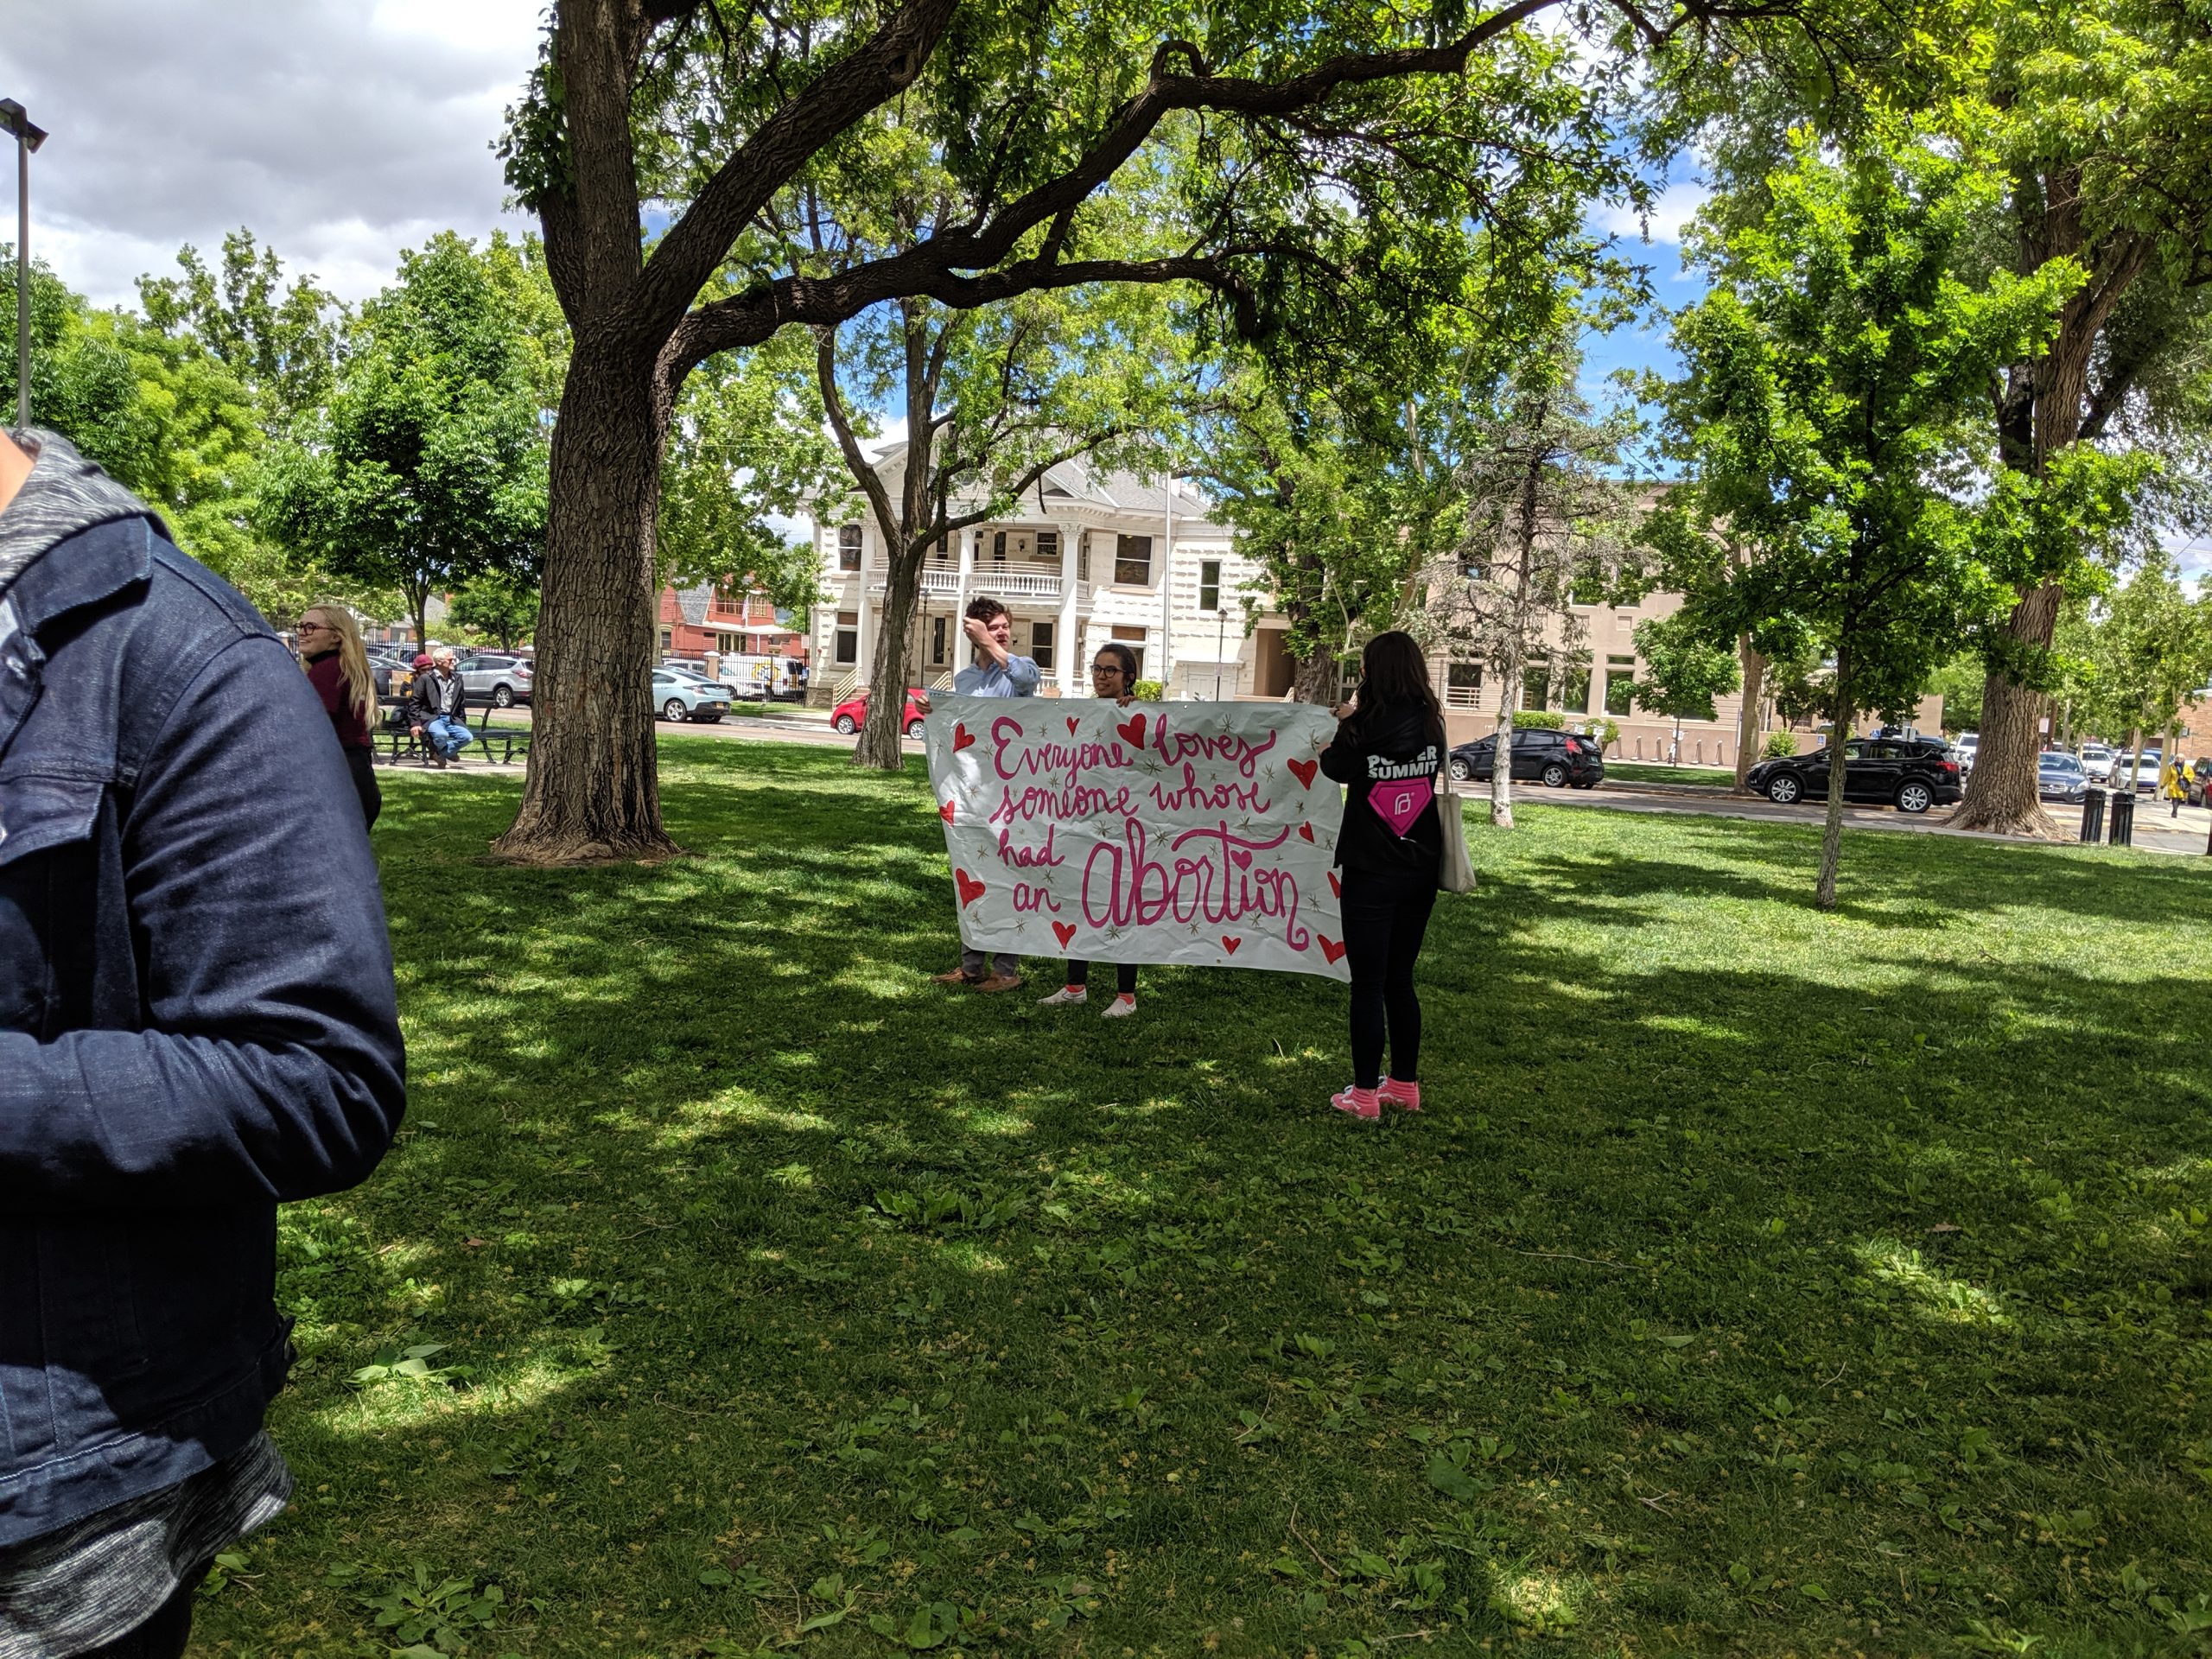 Texas abortion patients flew to Albuquerque for a one-day clinic visit